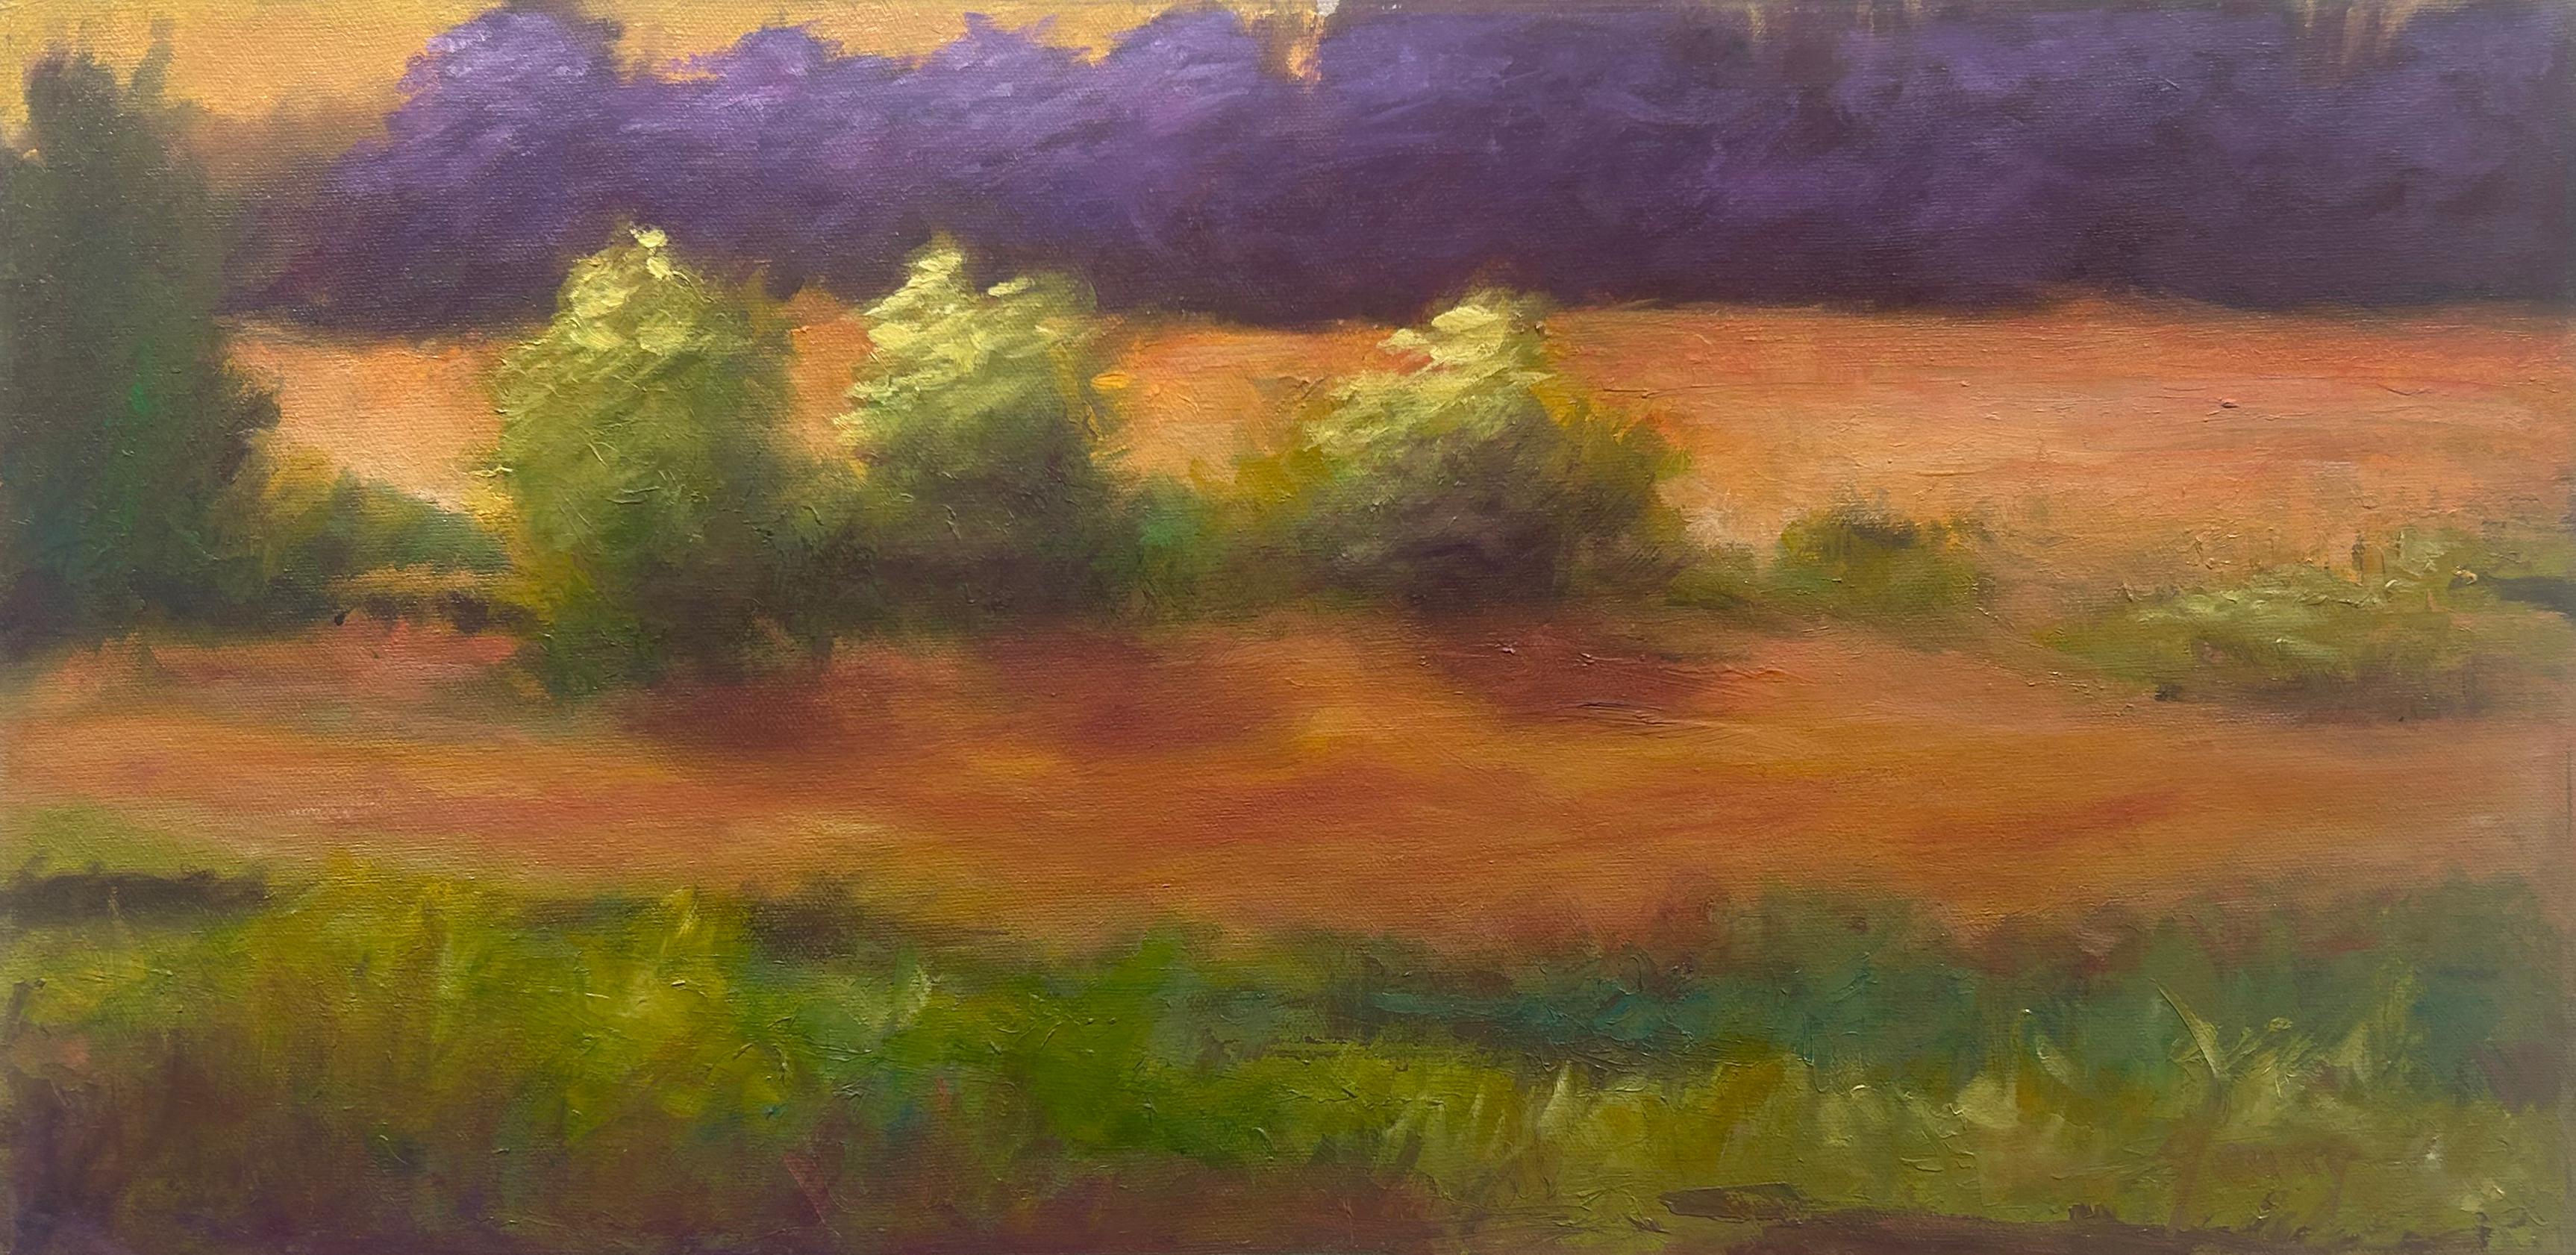 Laurence Young, "The Order of Things", 12x24 Impressionistic Landscape Painting